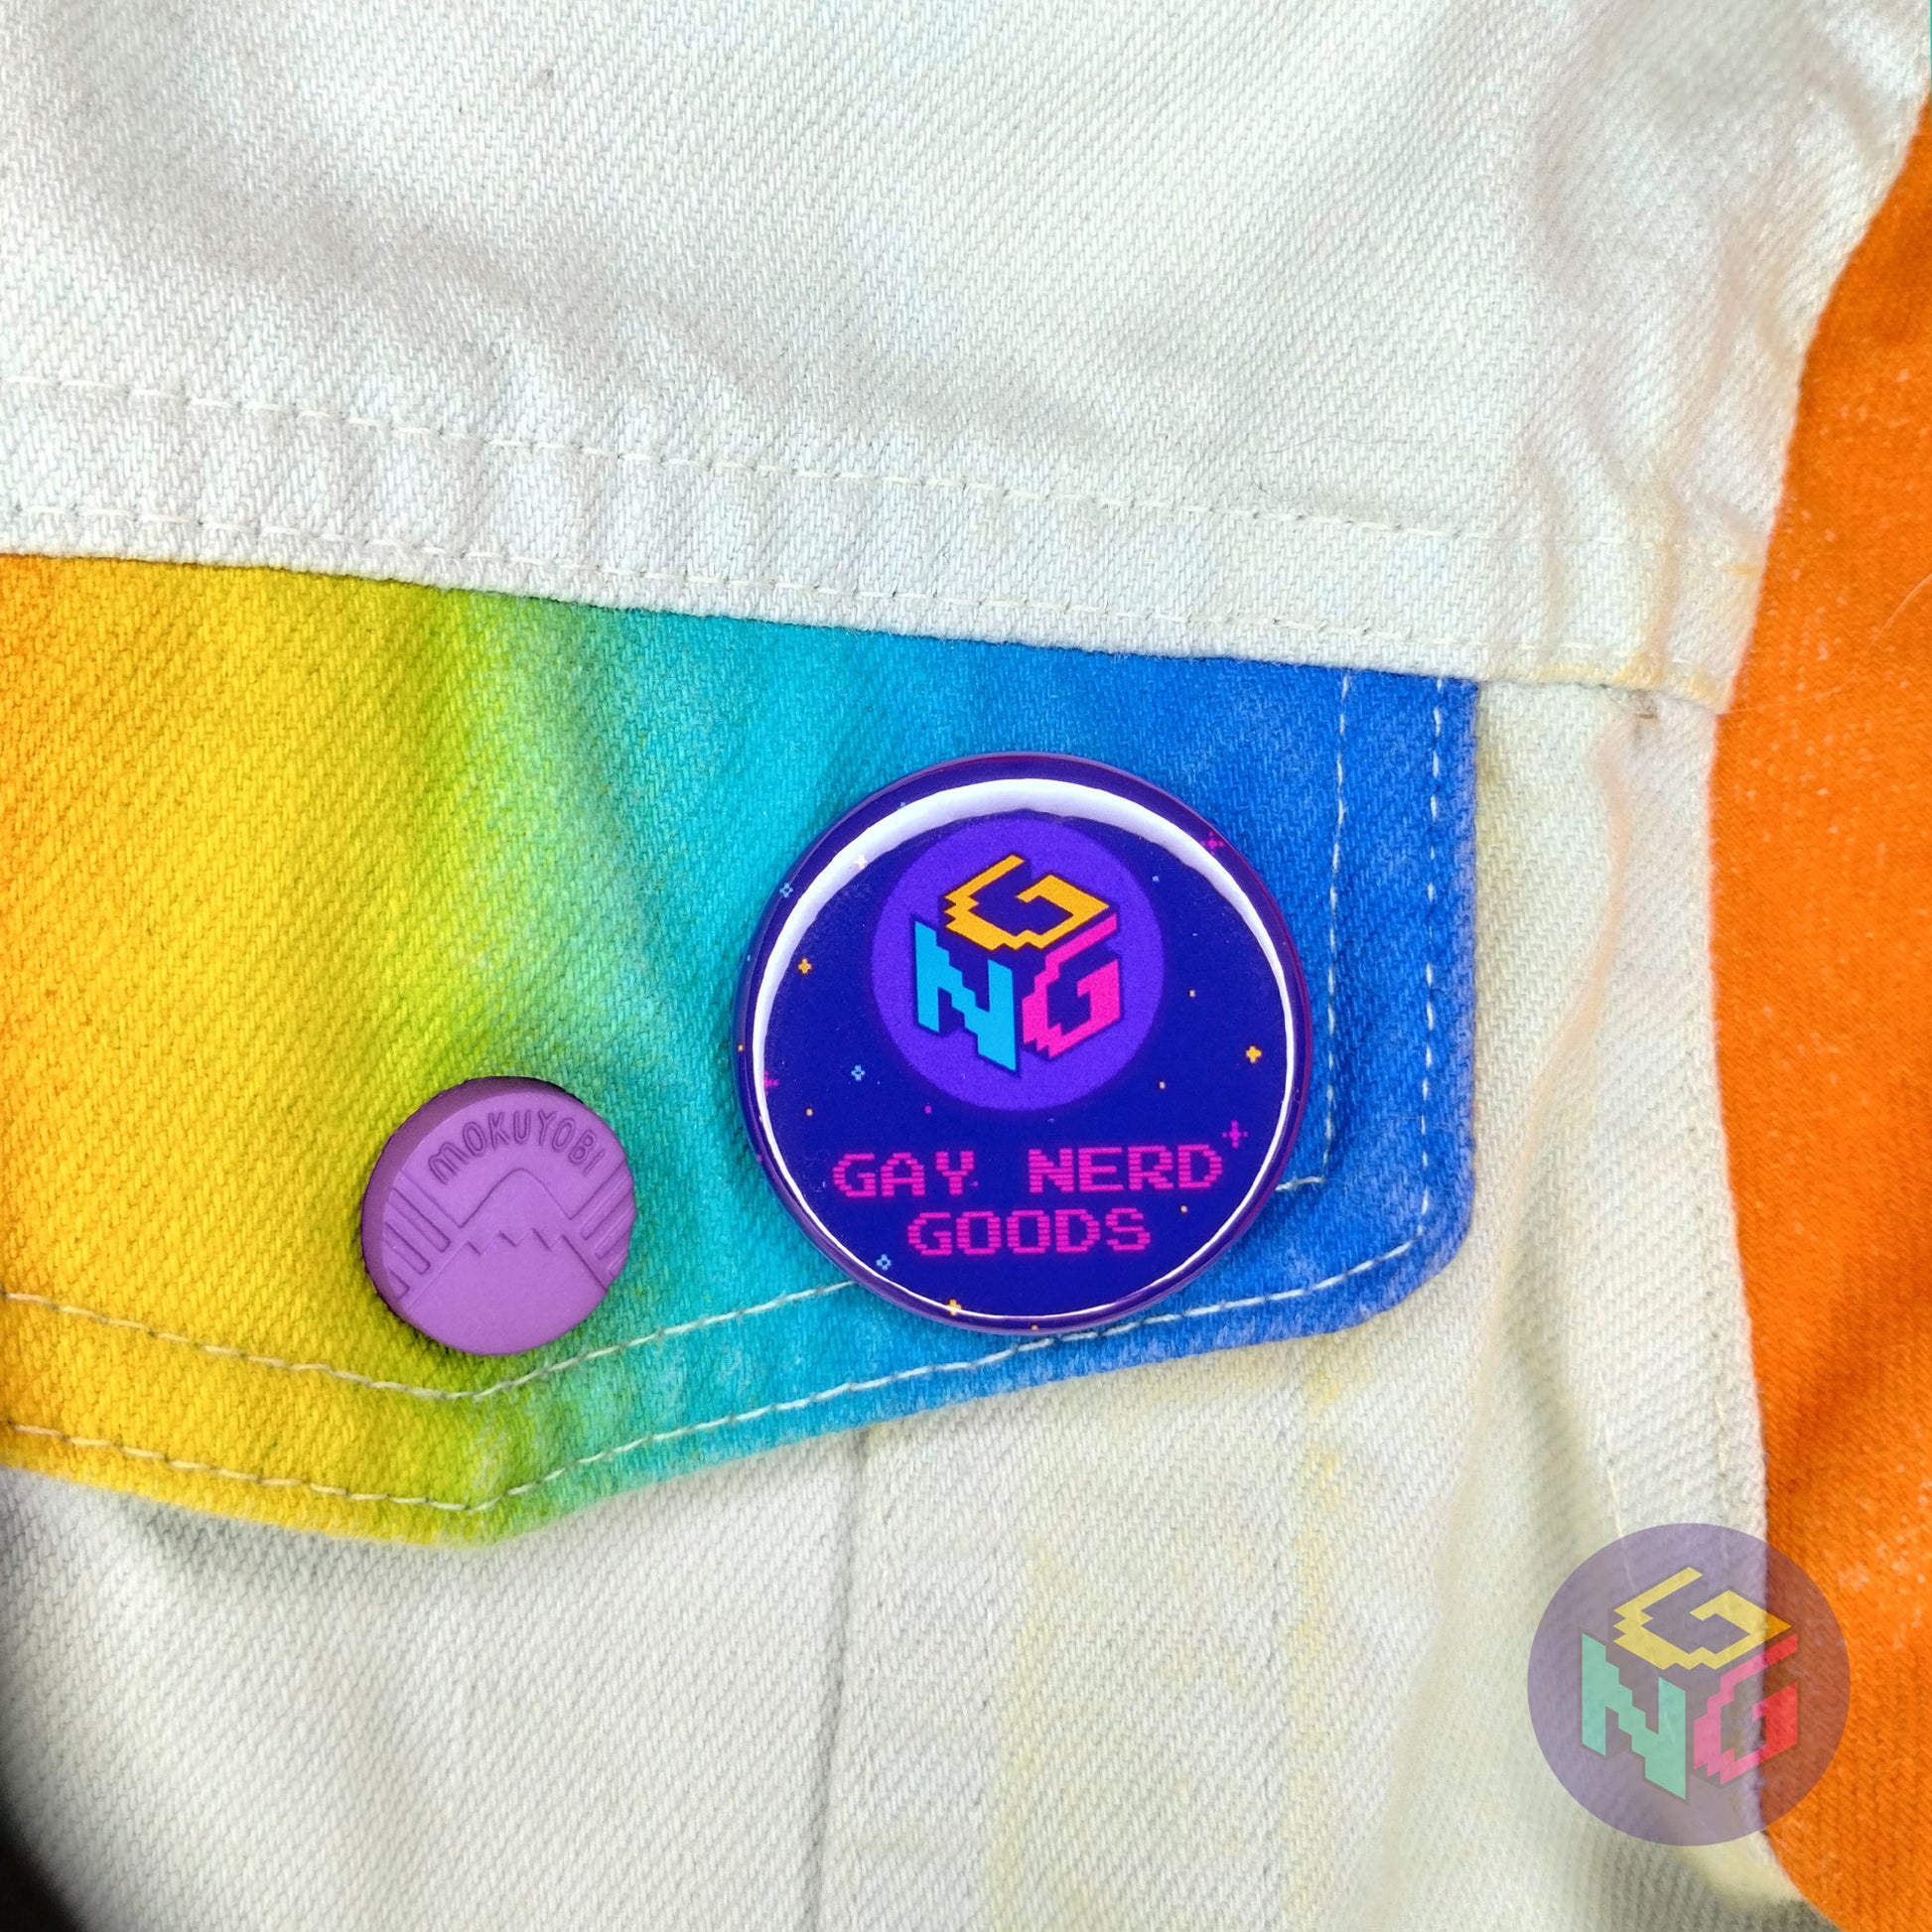 gay nerd goods 1.5" round logo button on the chest pocket of a white denim jacket with rainbow pocket flaps